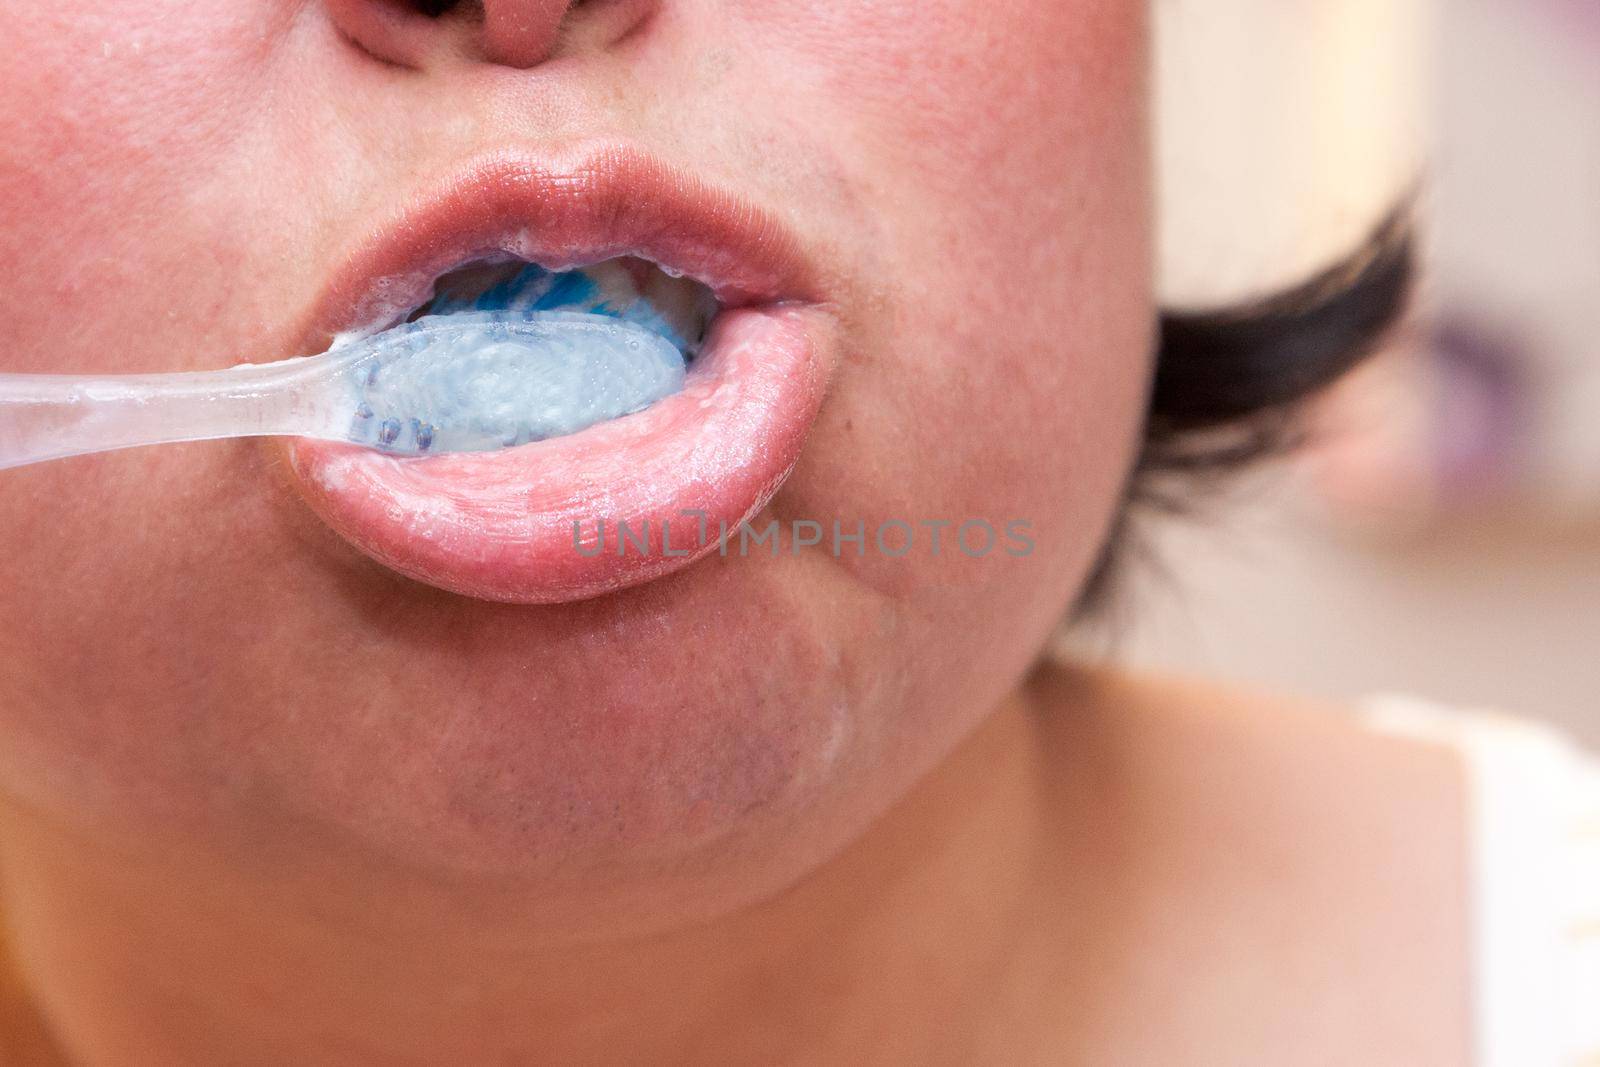 An extremely close view of a mouth and toothbrush 